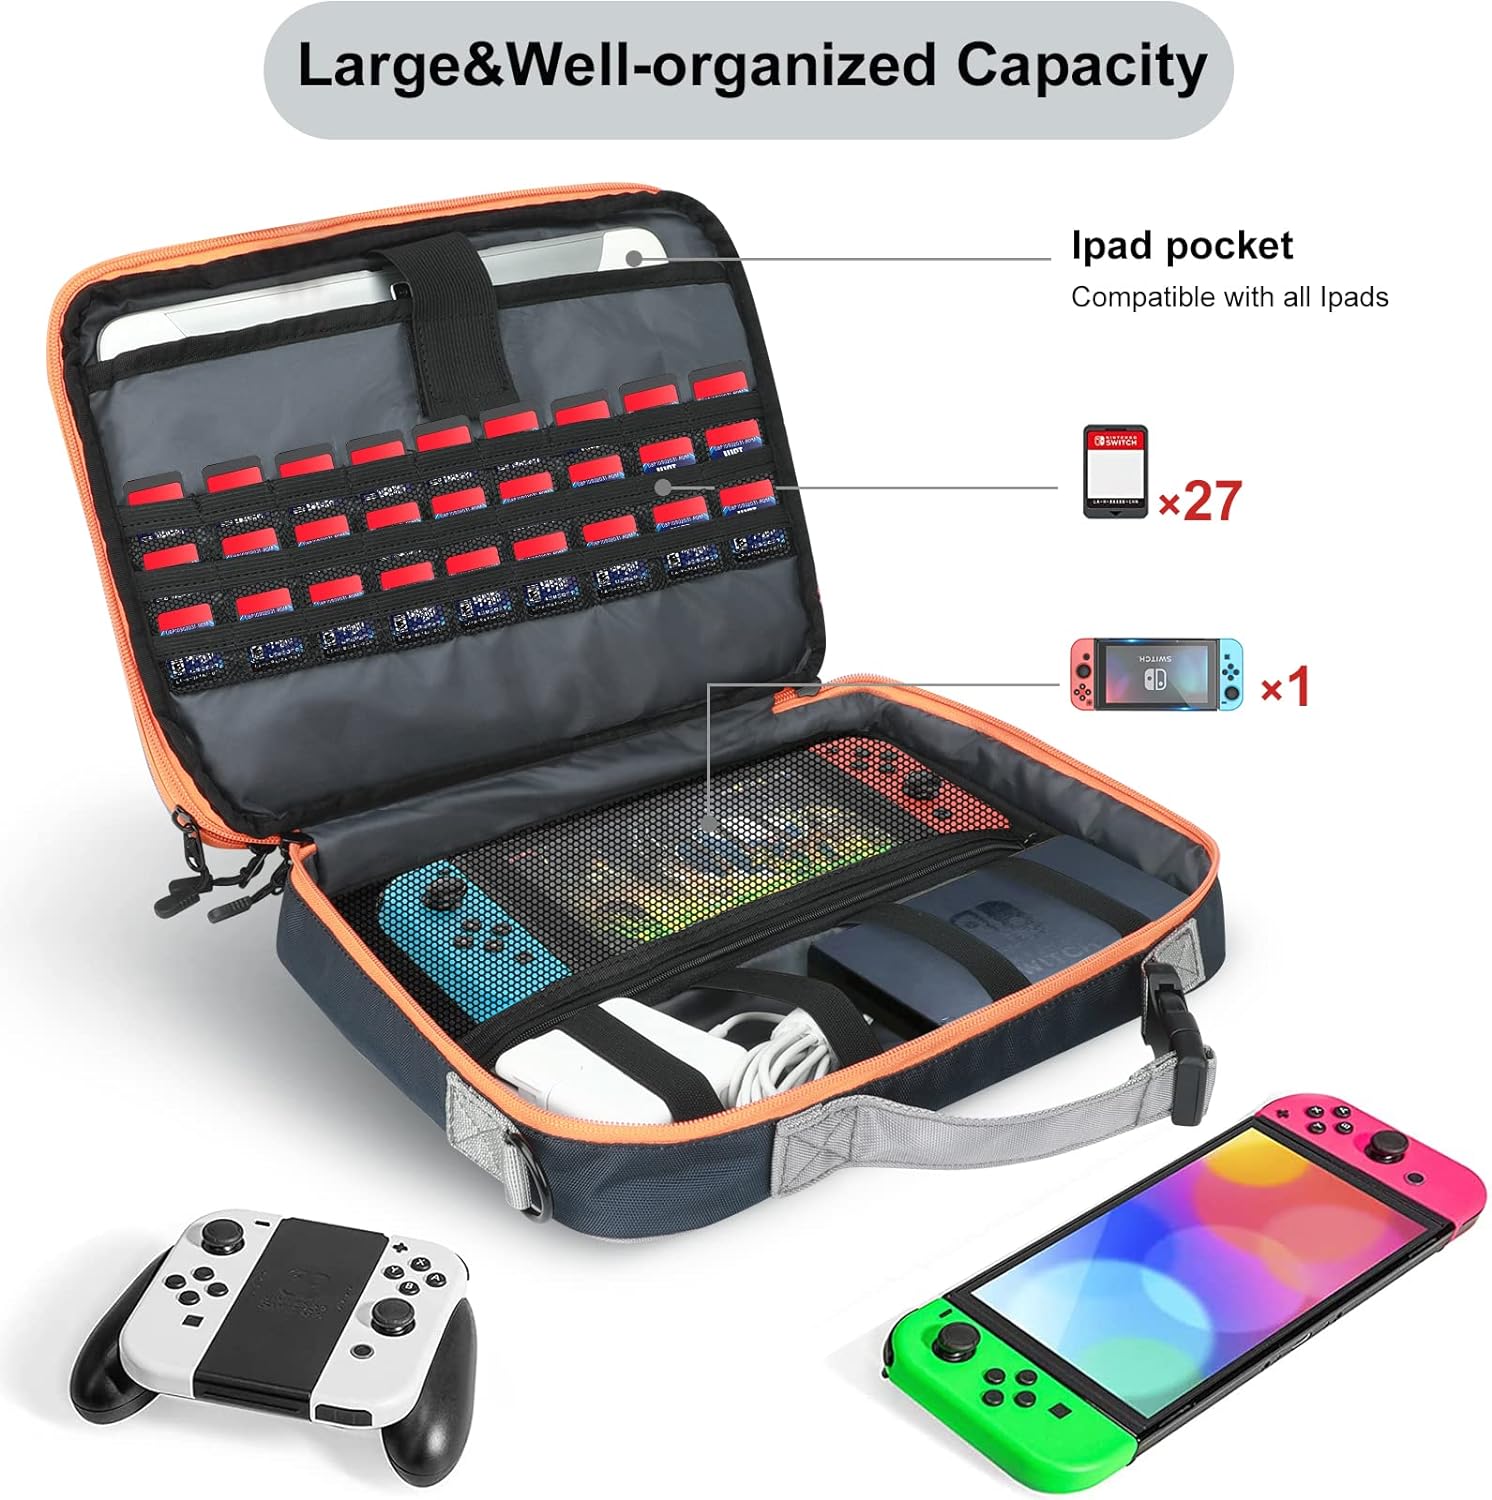 11.6 Inch Double Layer Travel Cable Organizer Bag,27 Game Storage for Switch Bag,Electronic Bag for Laptop,Table -Gray with Blue, Gray With Blue